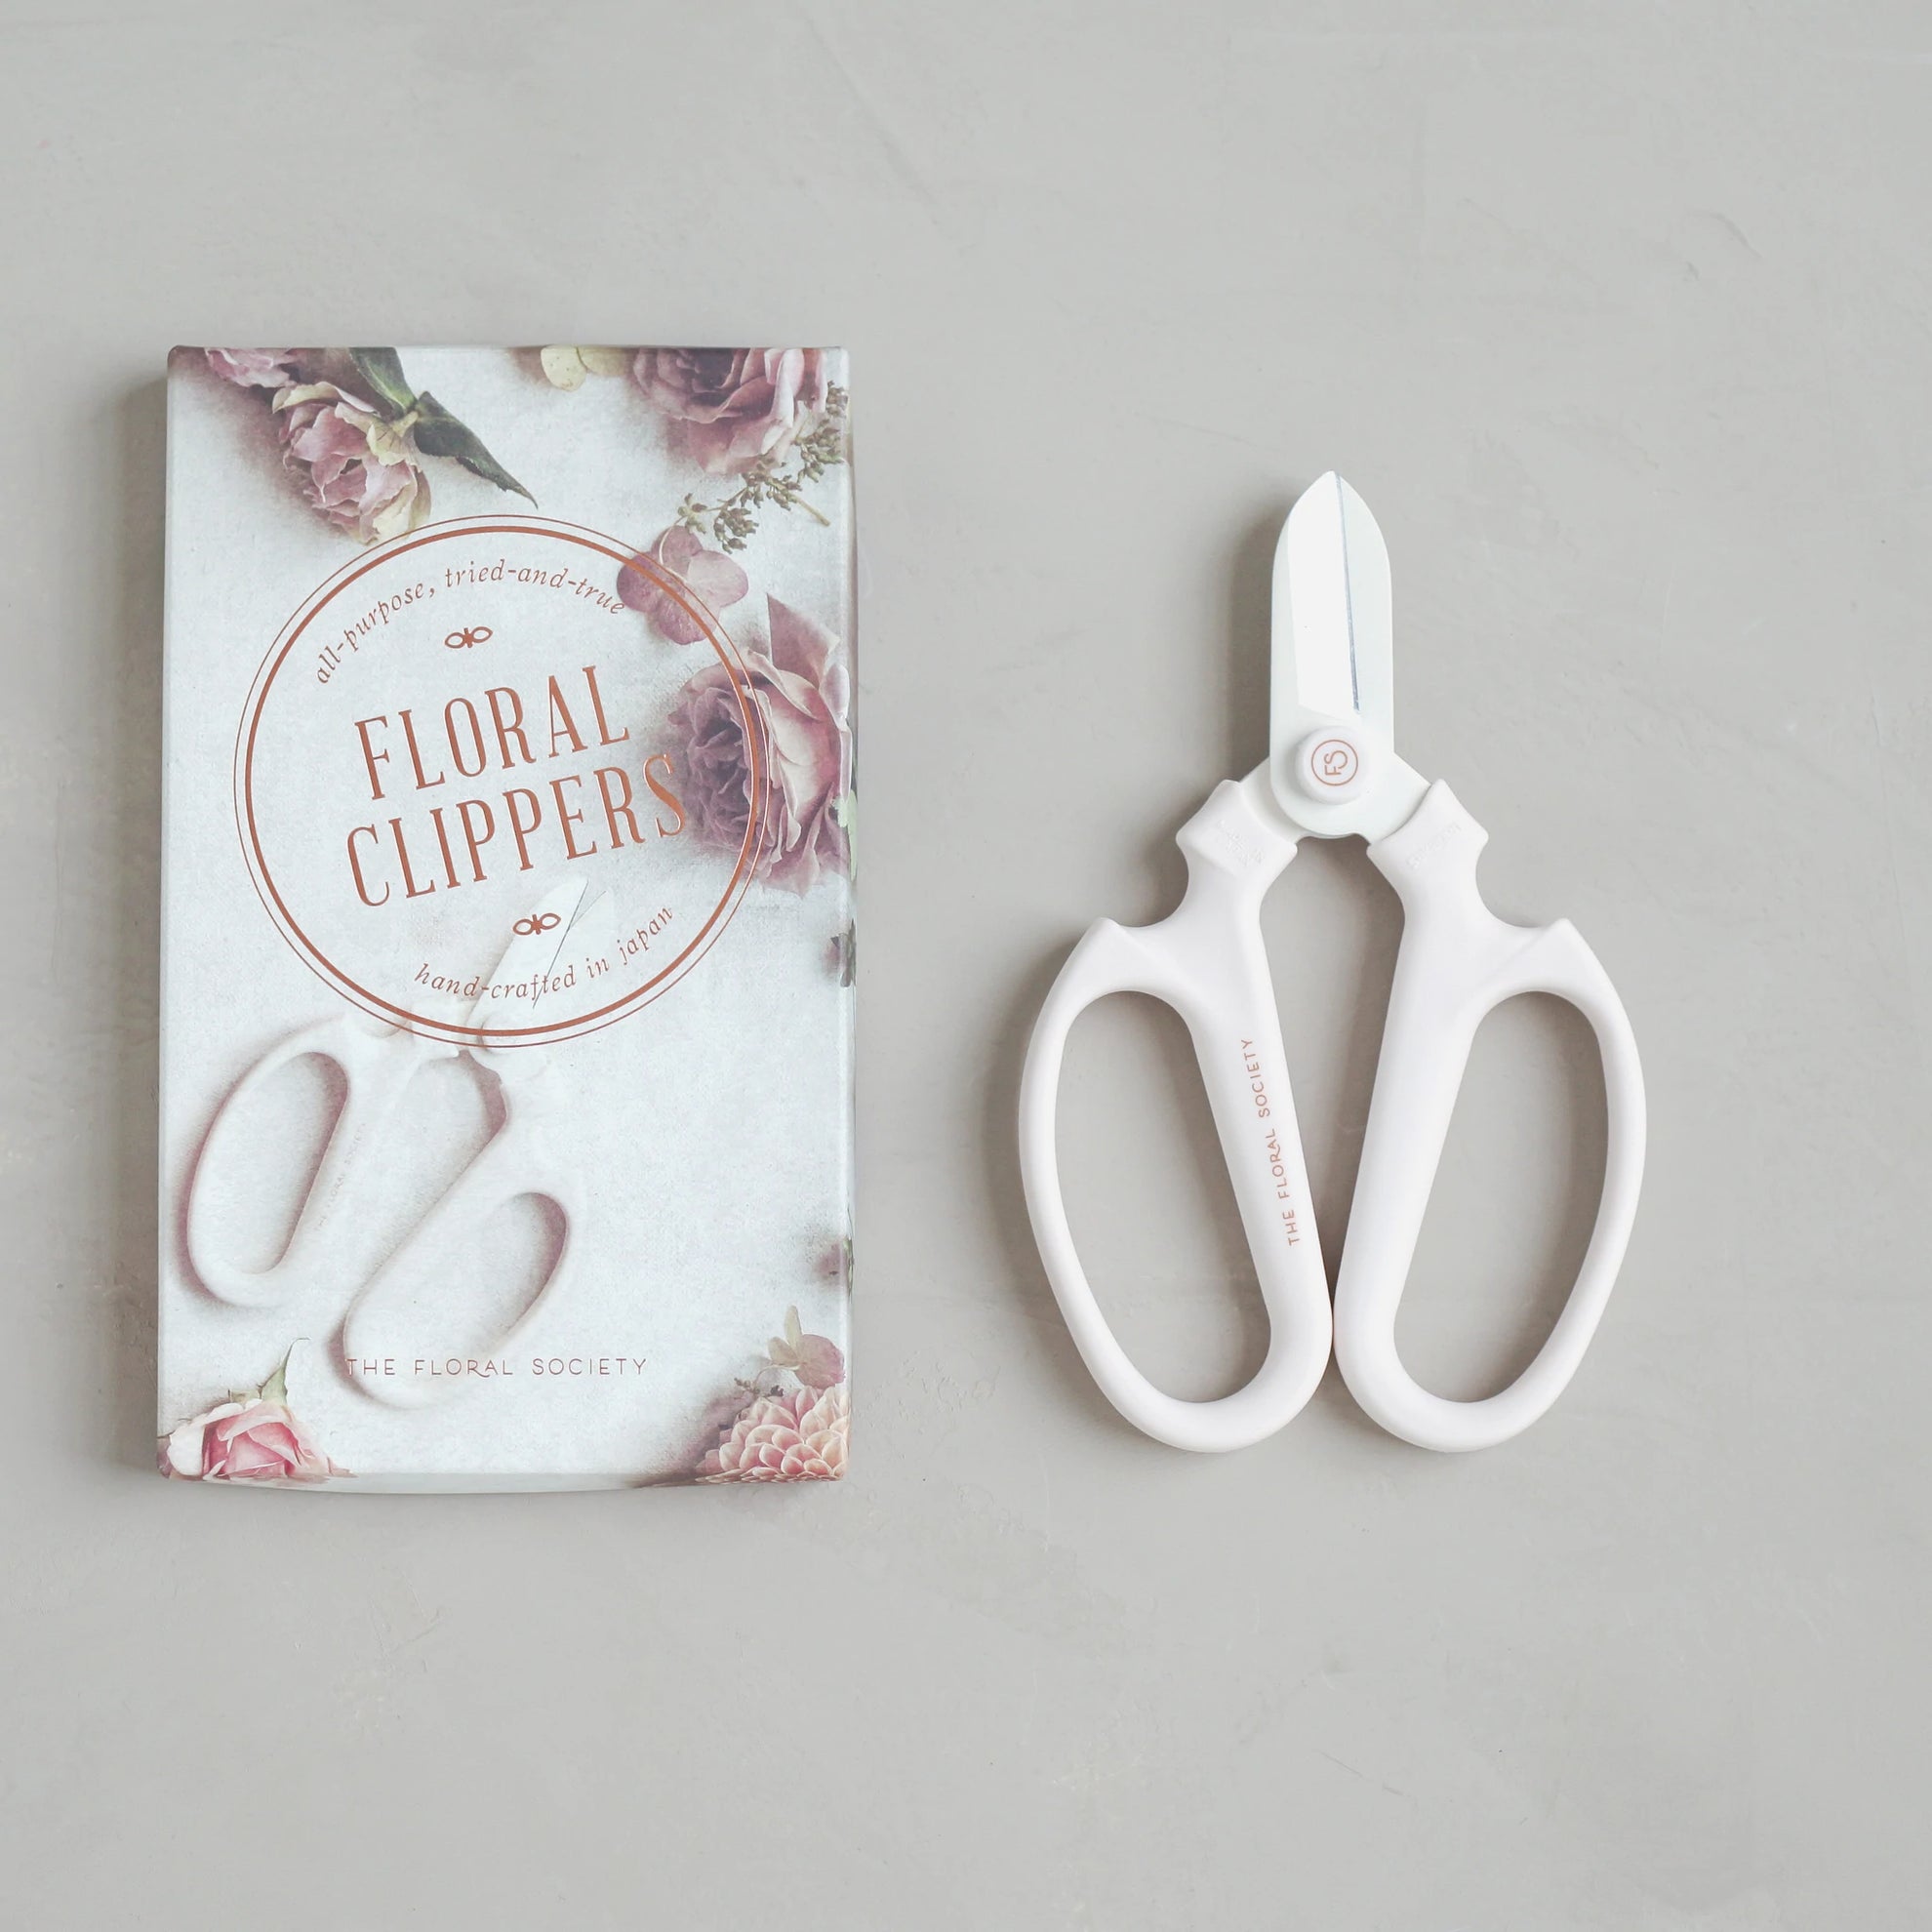 Japanese Floral Clippers